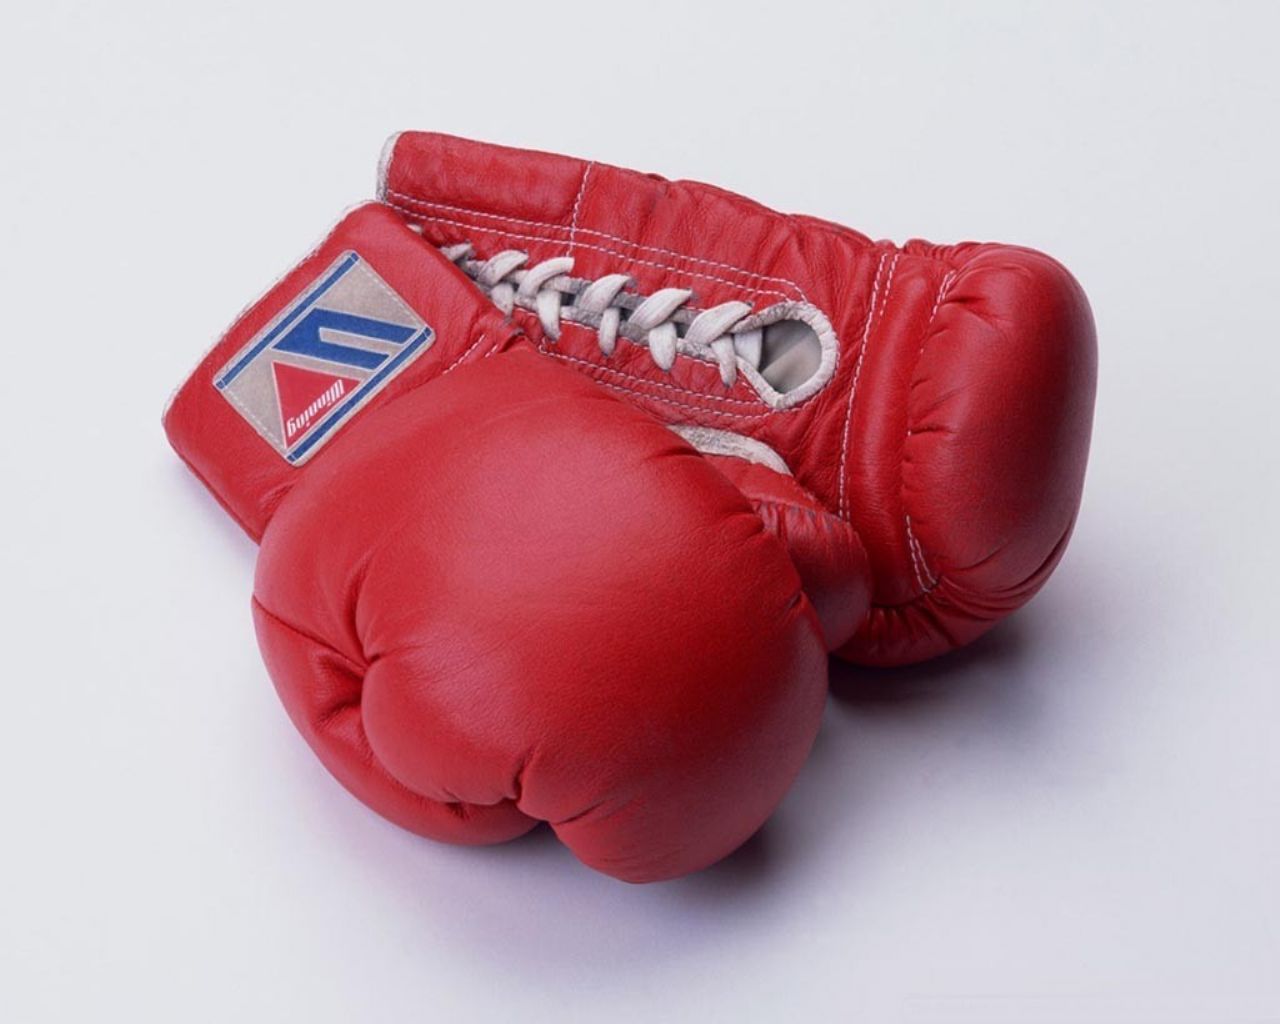 Red Boxing Gloves Wallpaper